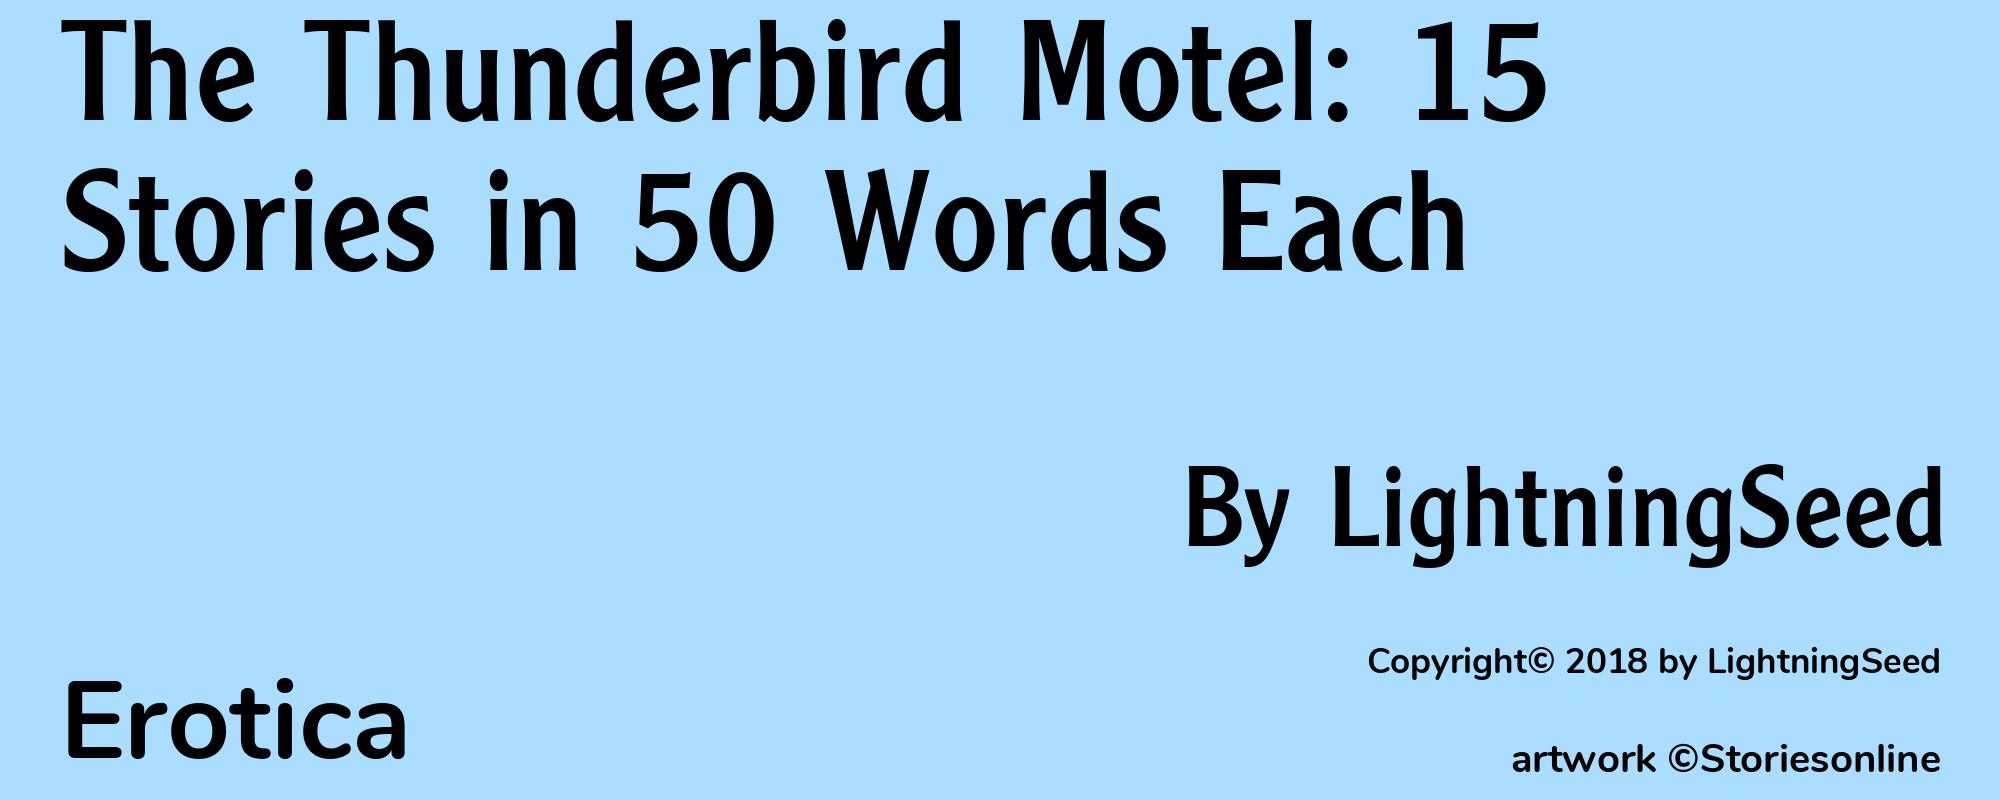 The Thunderbird Motel: 15 Stories in 50 Words Each - Cover